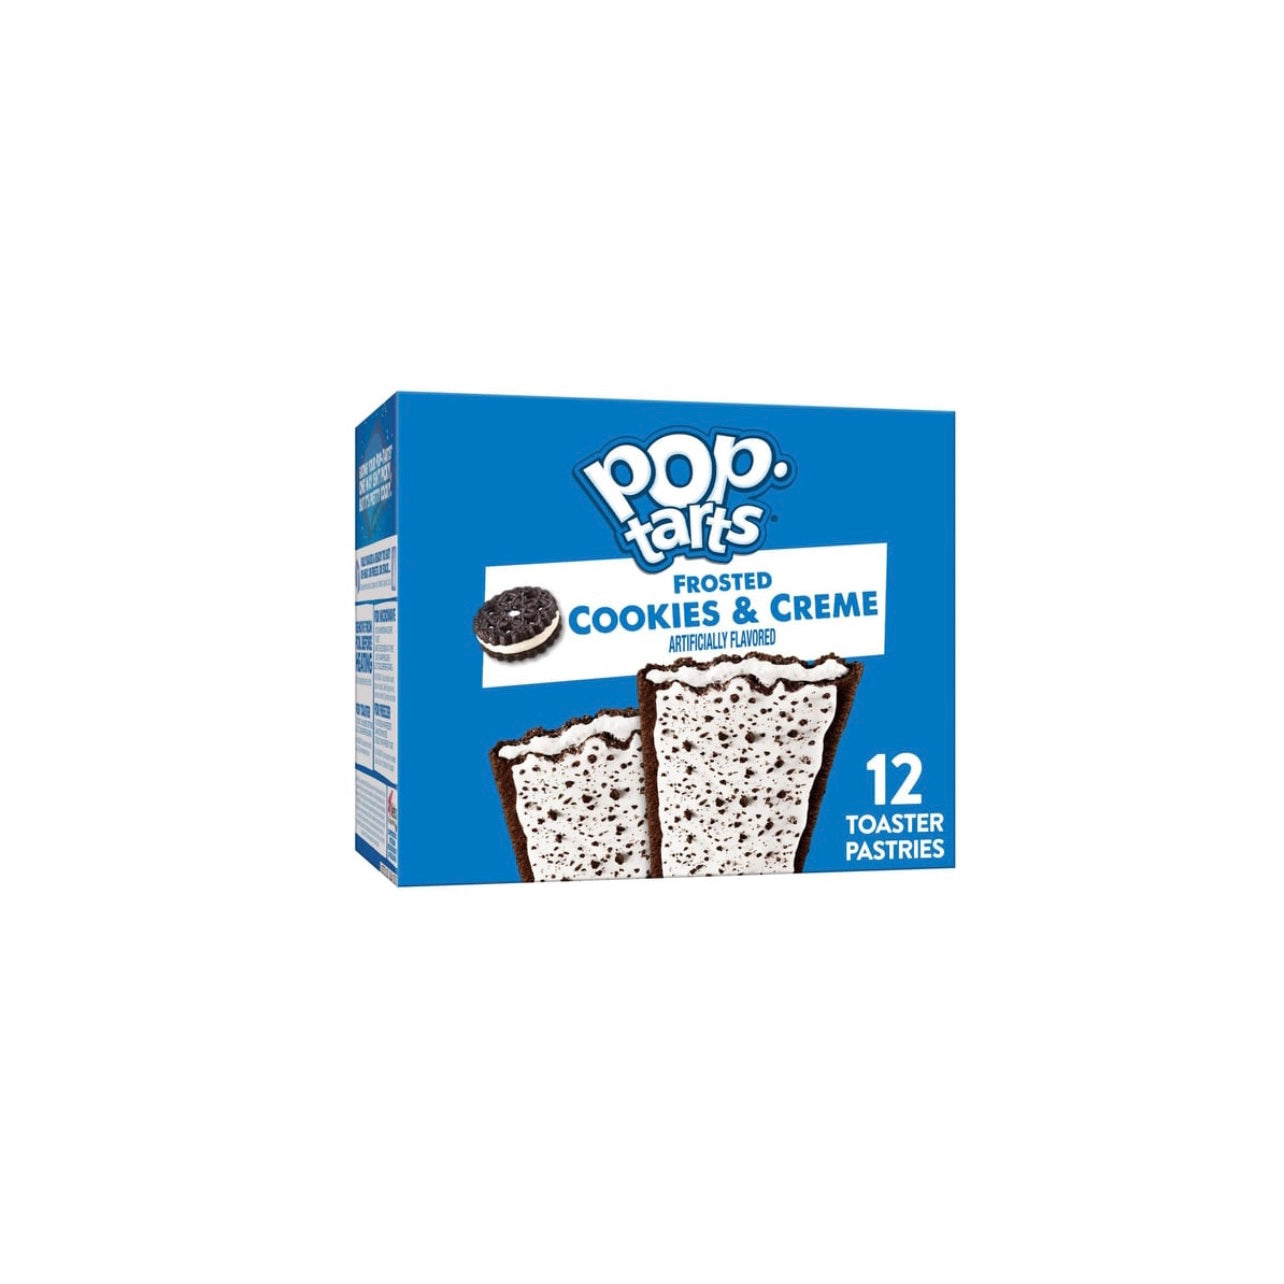 PopTarts Frosted Cookies & Creme (038000223167)